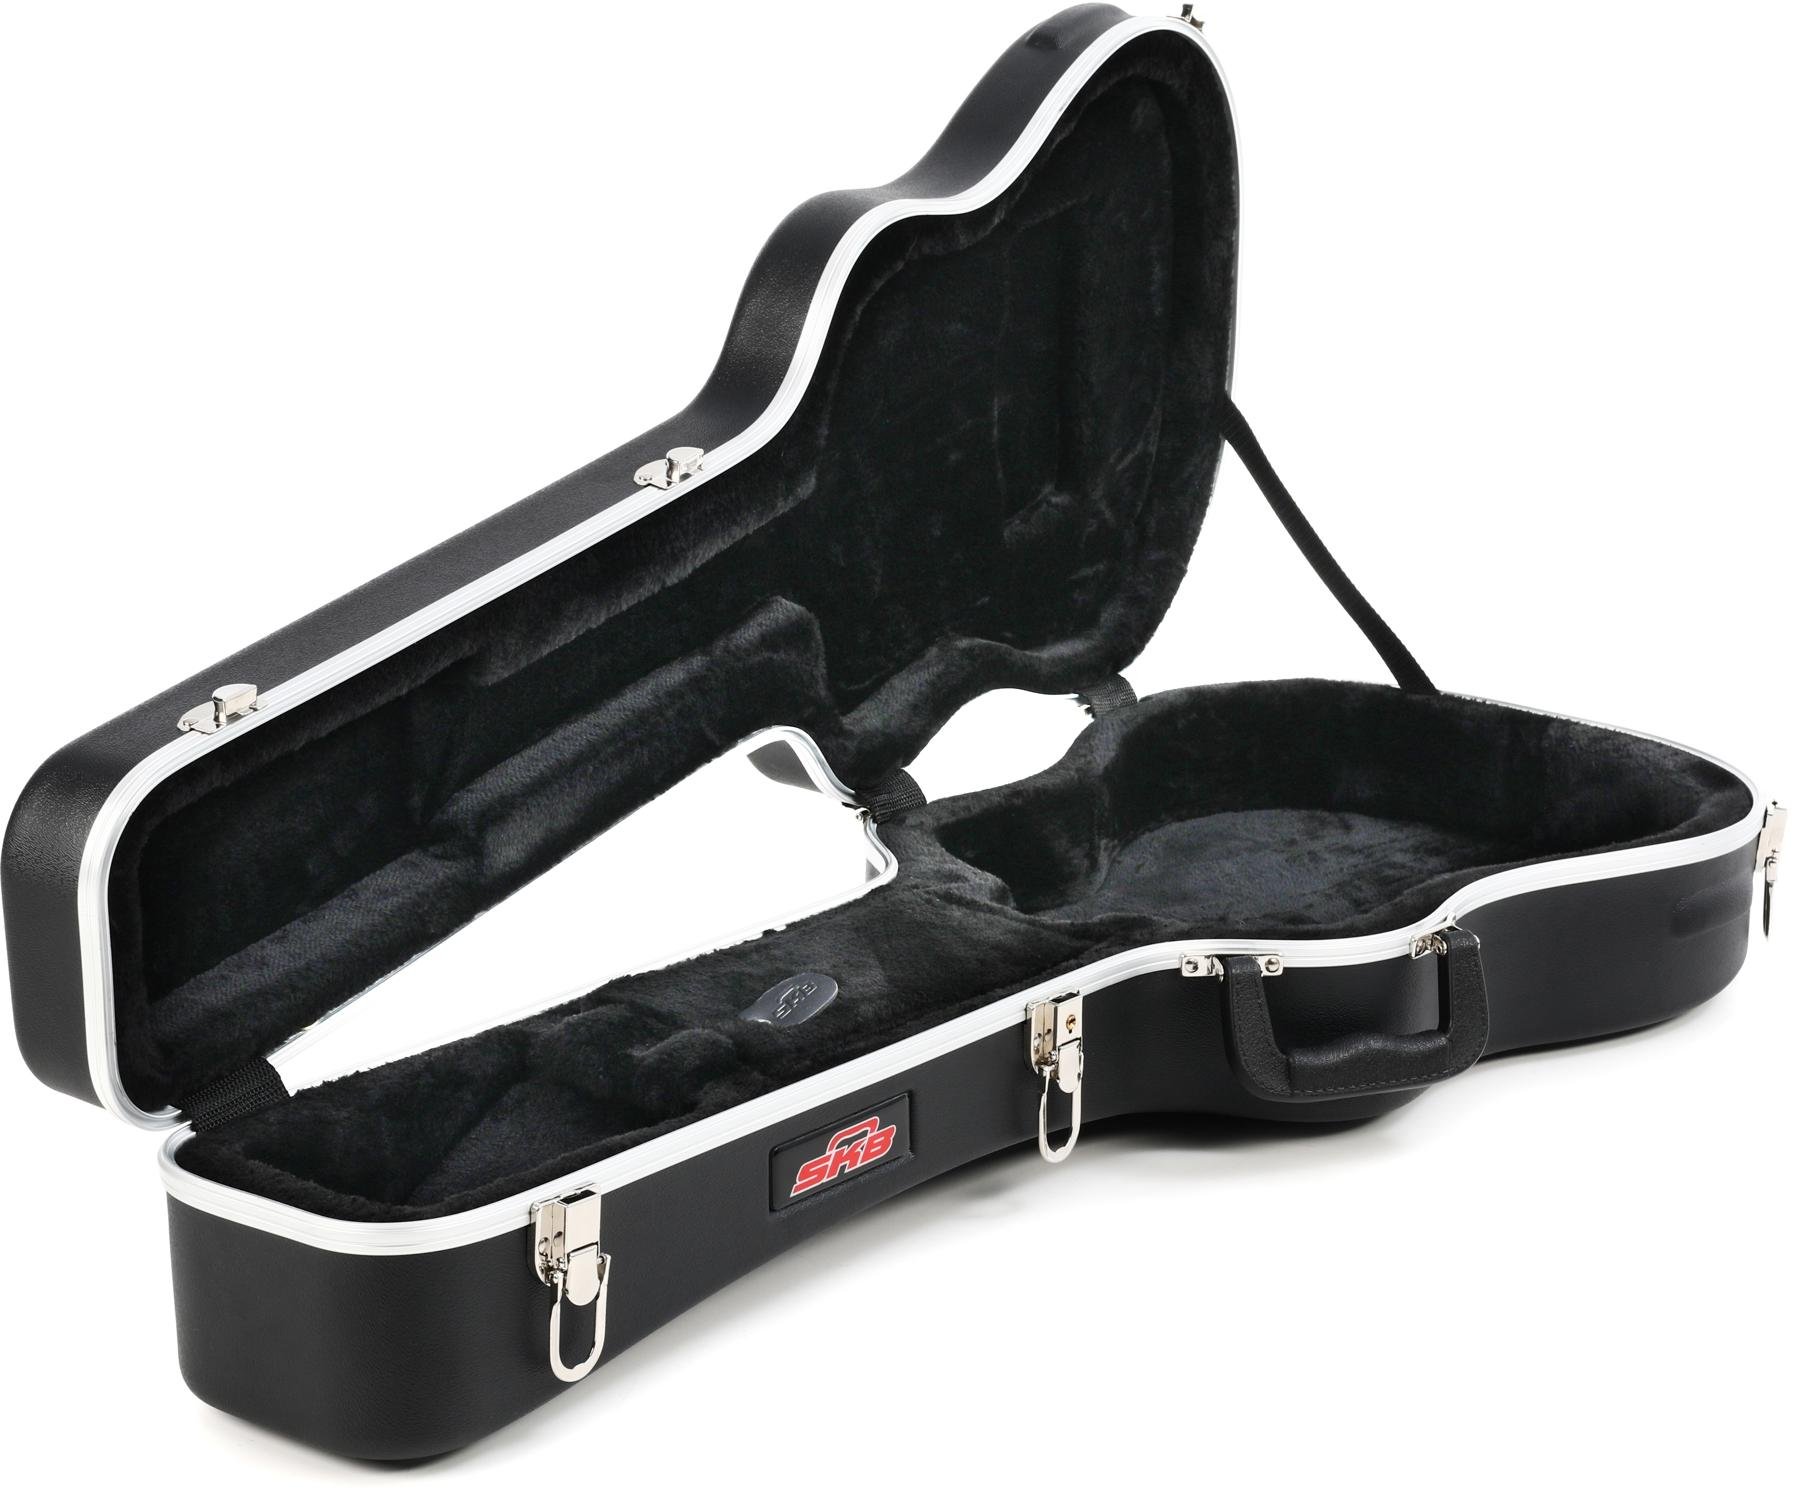 SKB 1SKB-300 Baby Mini Acoustic Guitar Hard Case Fits Taylor/Martin LX and More 